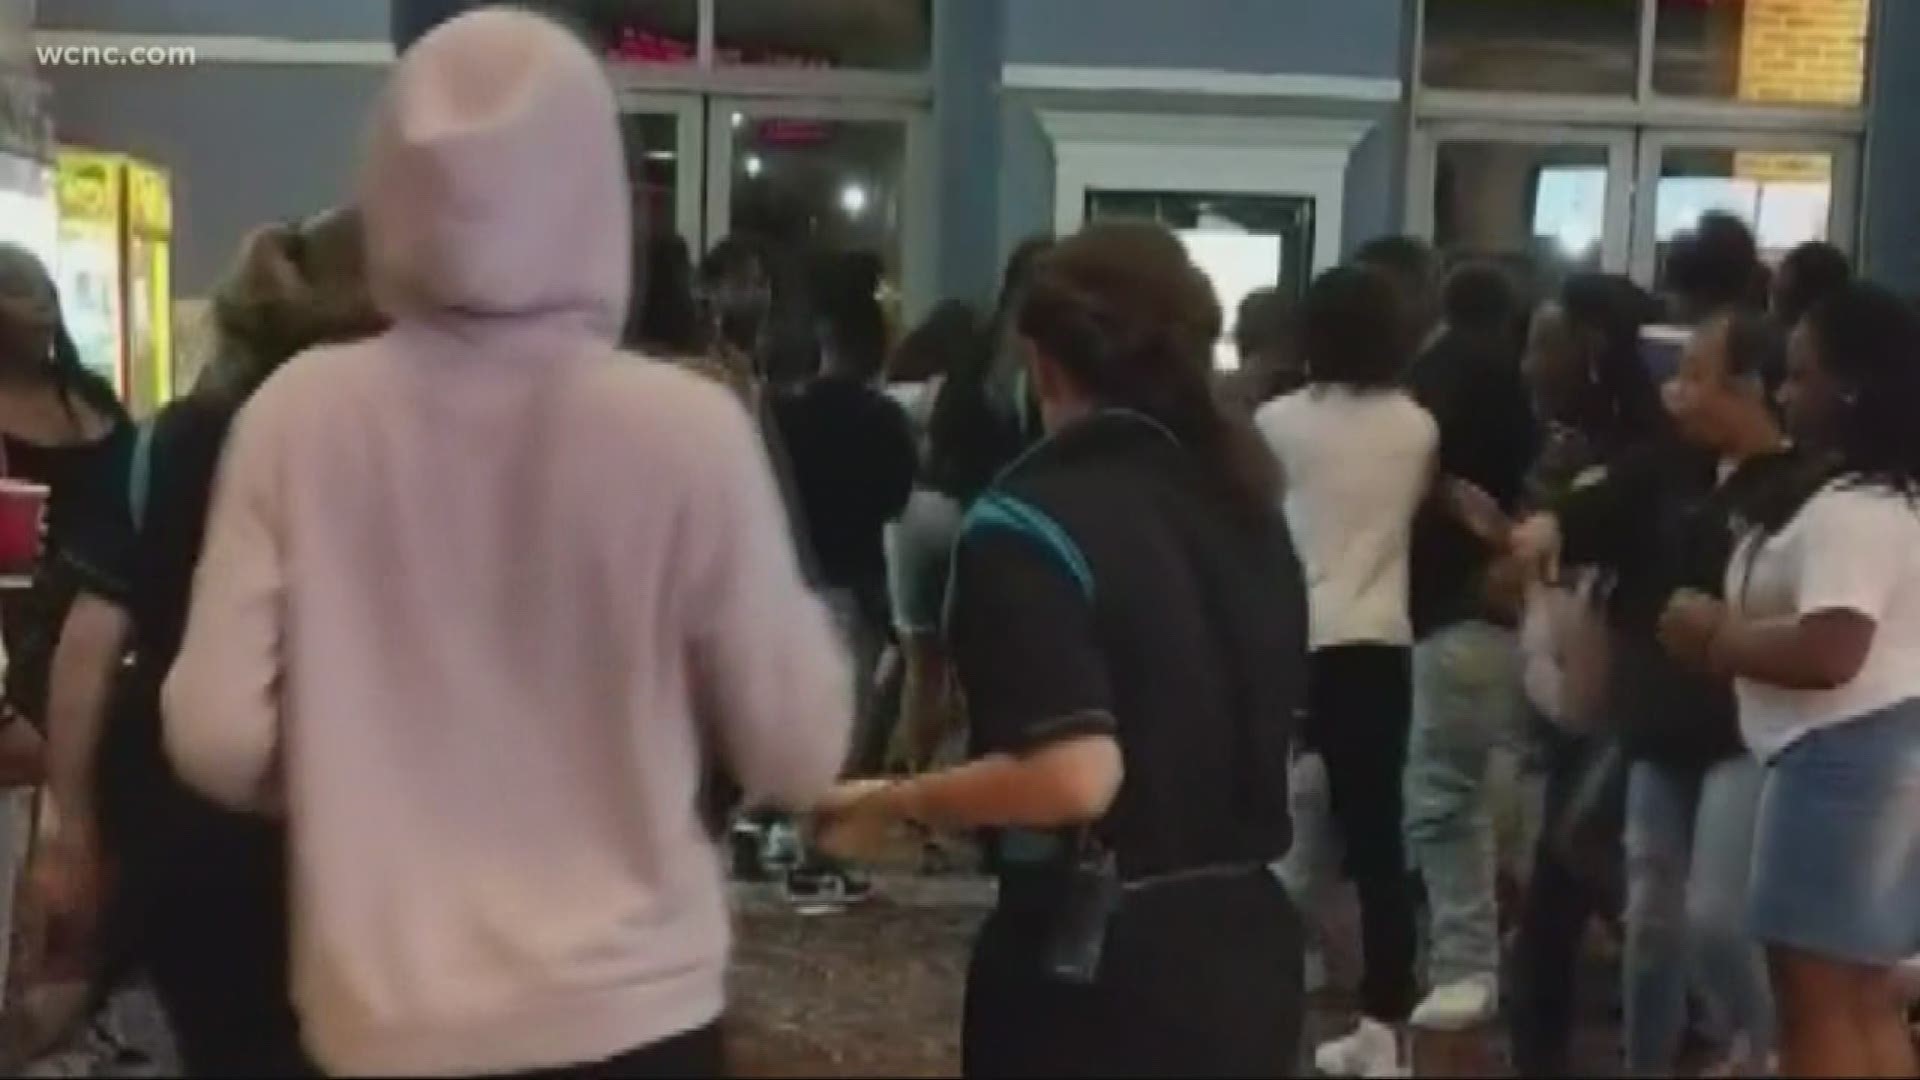 There were dozens fighting and dozens more watching, and it was all caught on camera. Some theater employees attempted to get the fight under control, while movie-goers called the police.